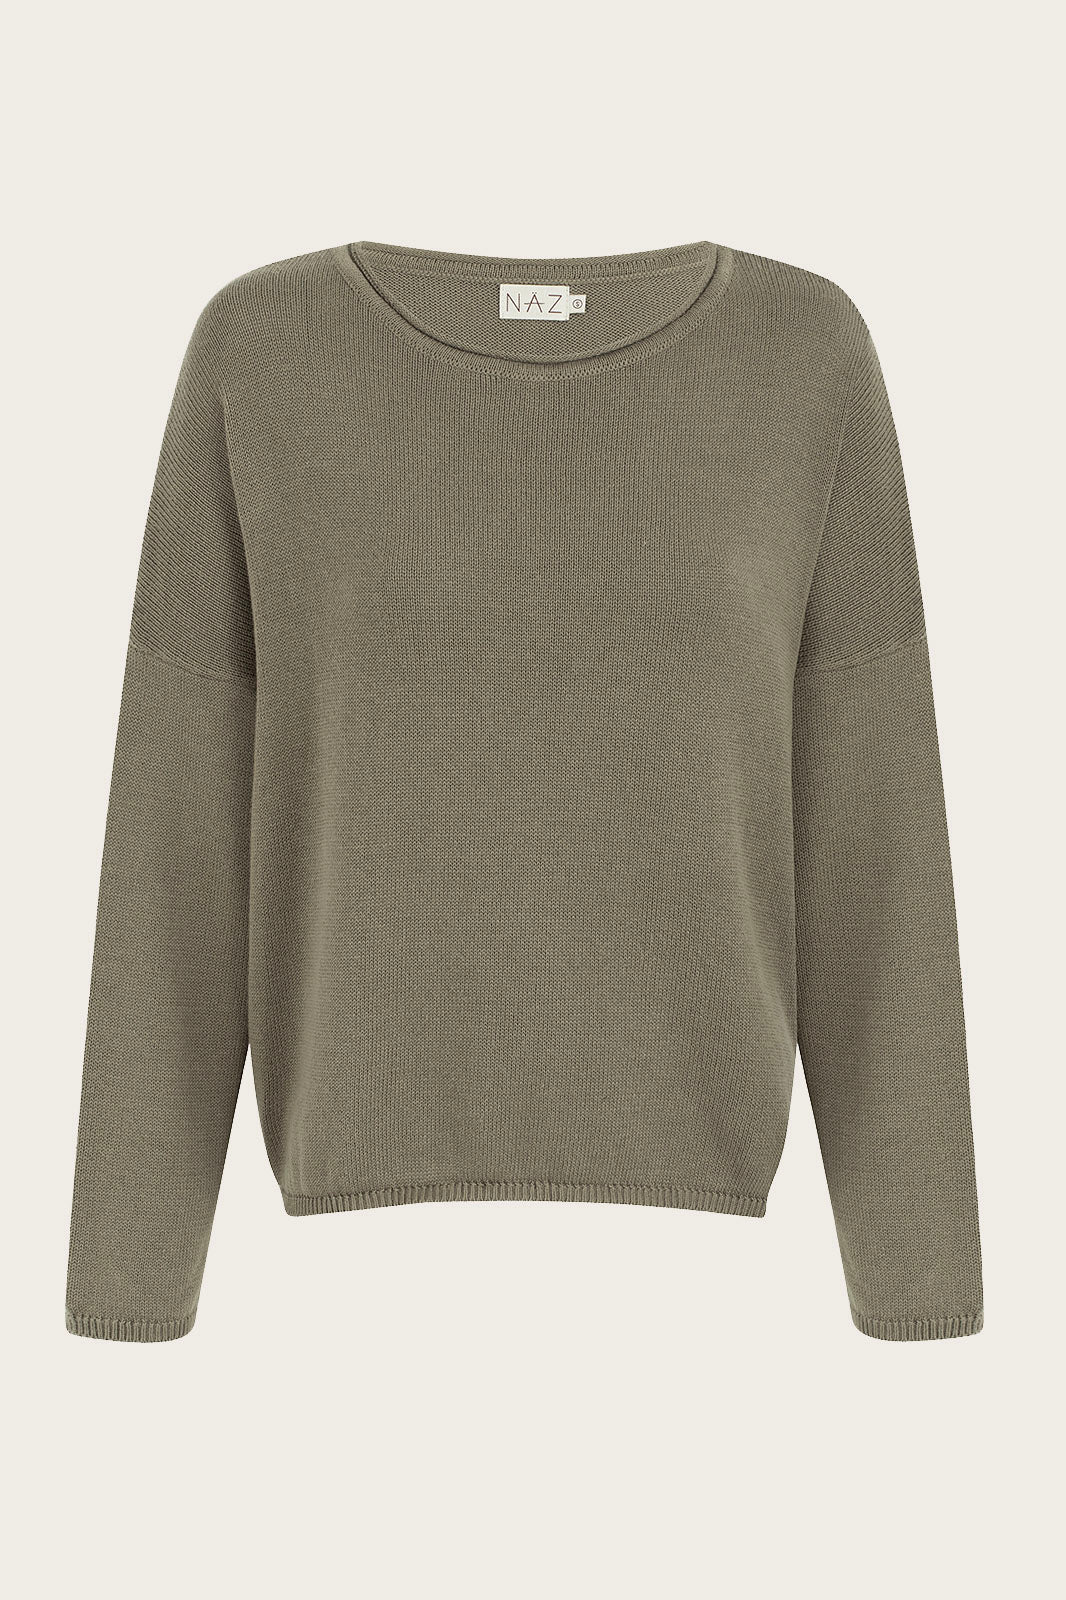 Naz women's recycled cotton sweater. Ethically produced in Portugal this sweater features an oversized fit with a boat neck. 